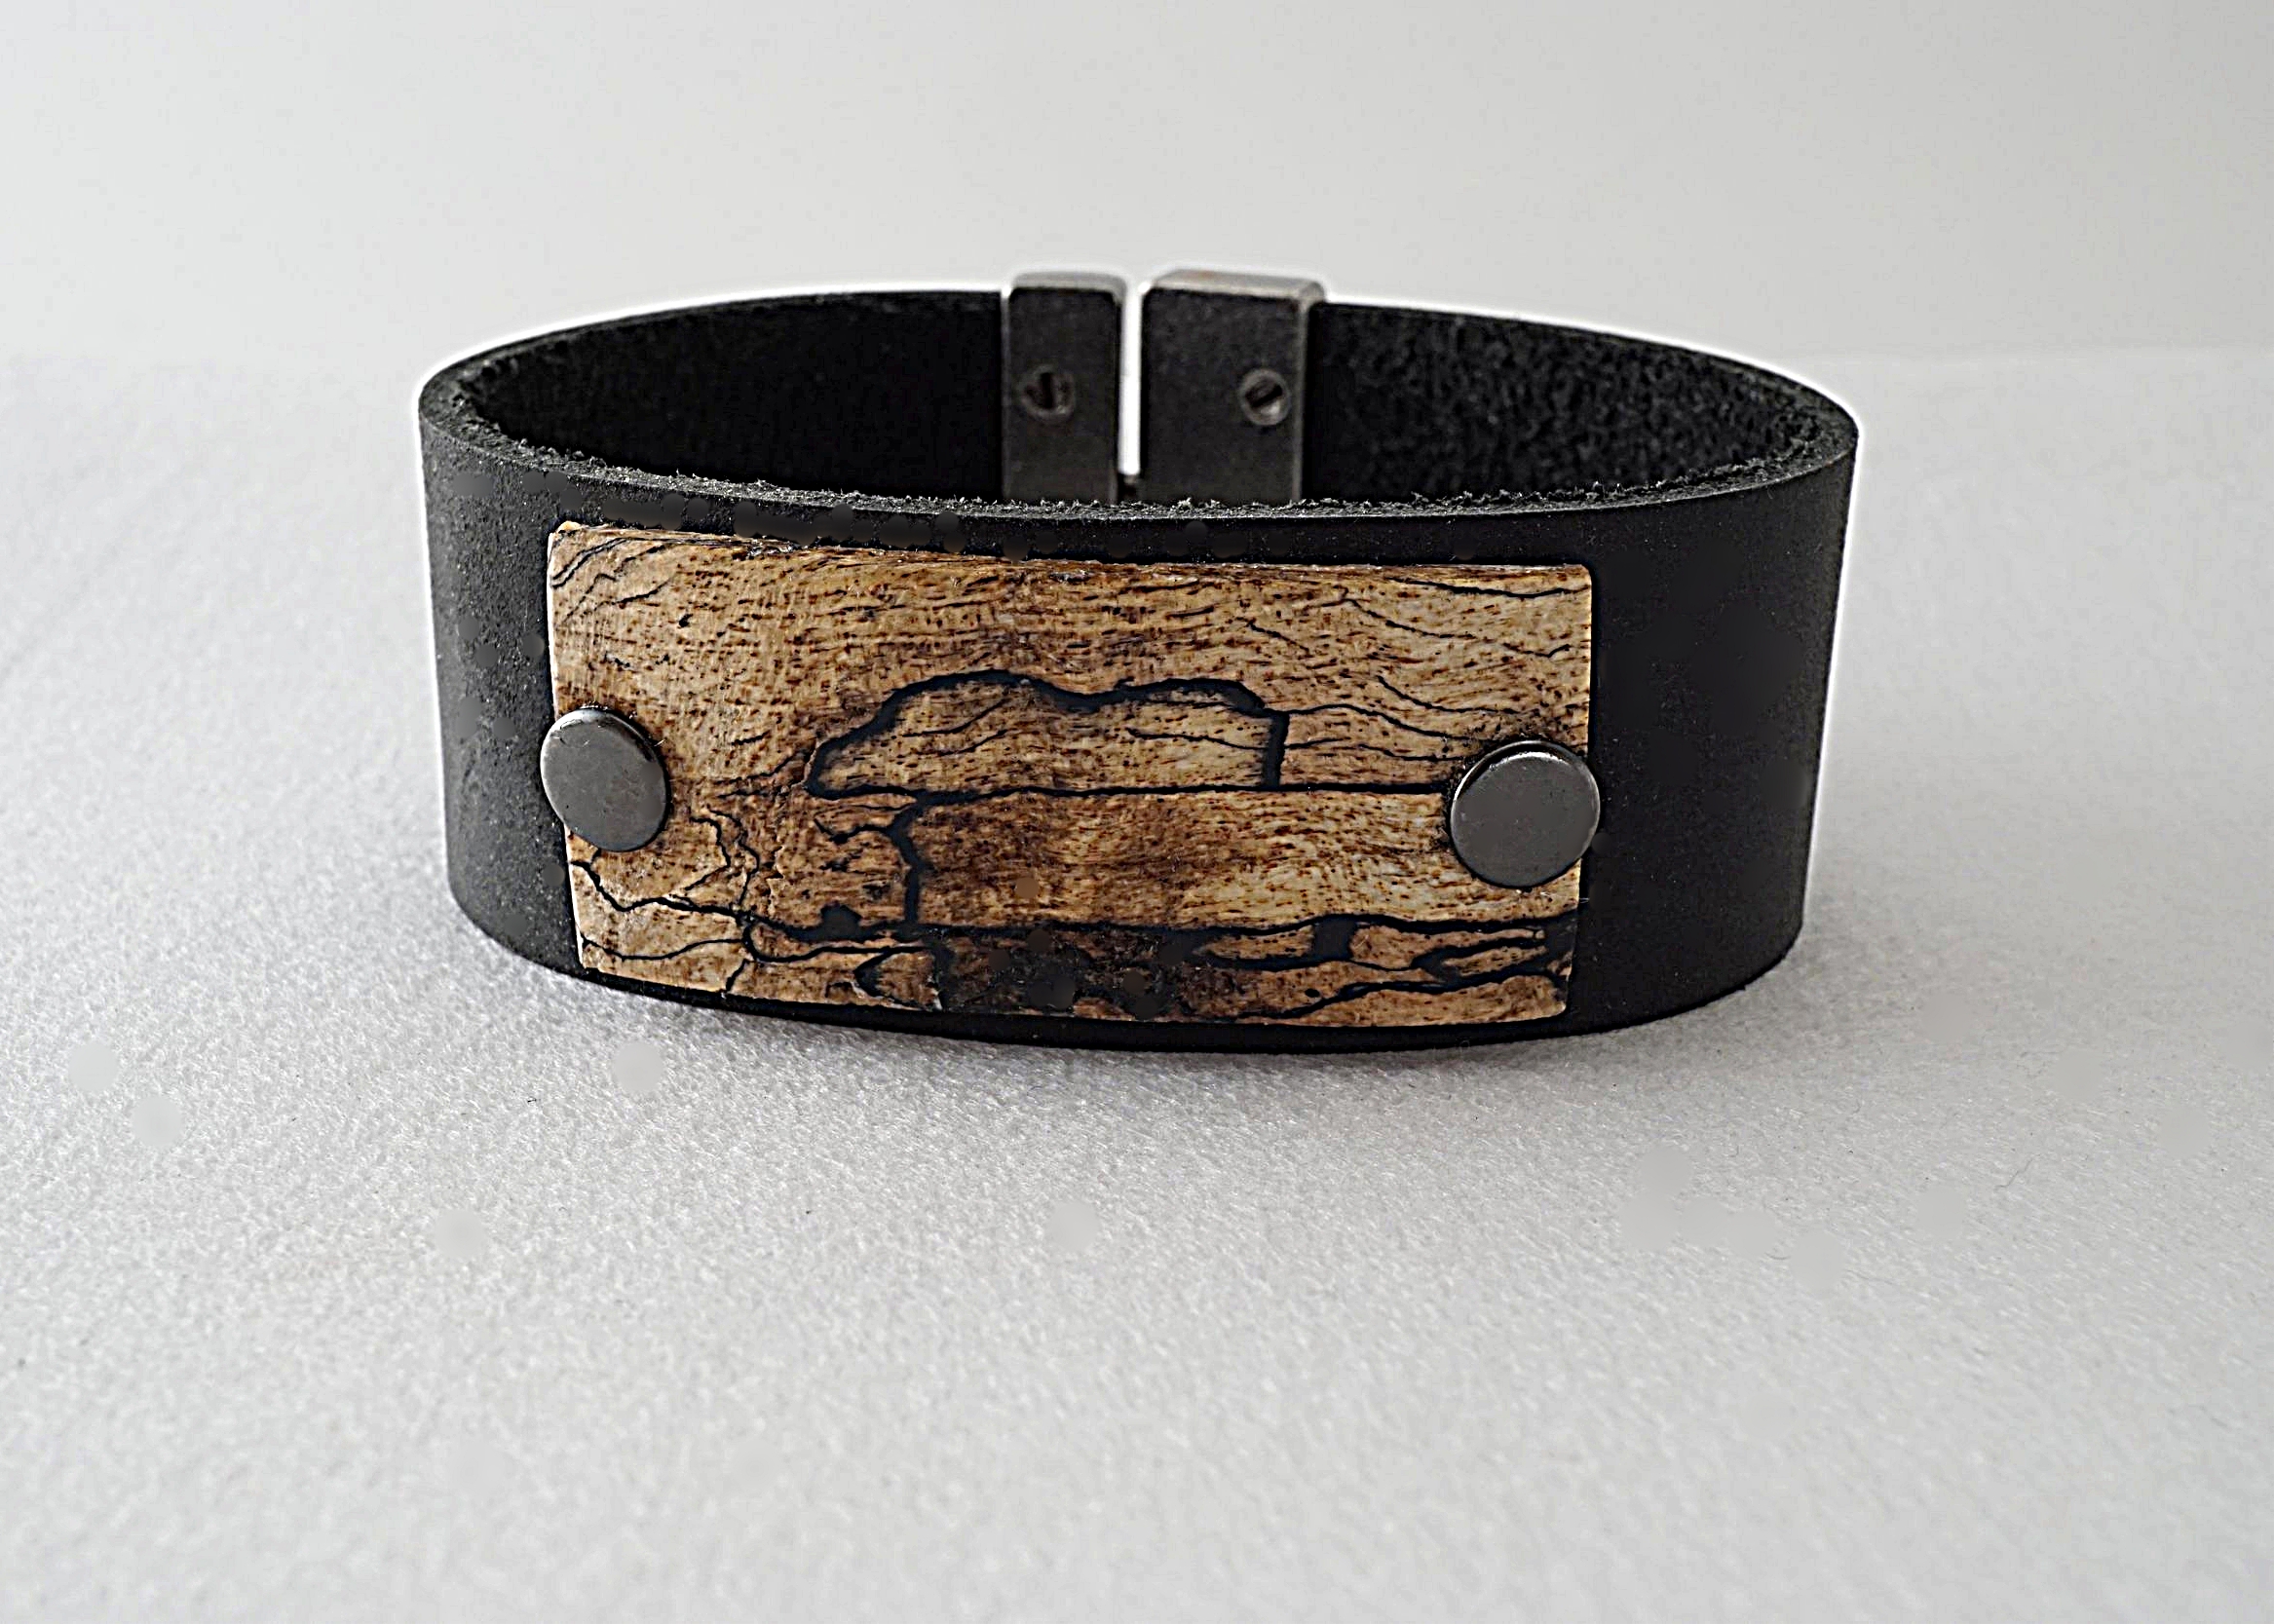 Hand carved spalted tamarind wood riveted onto leather band